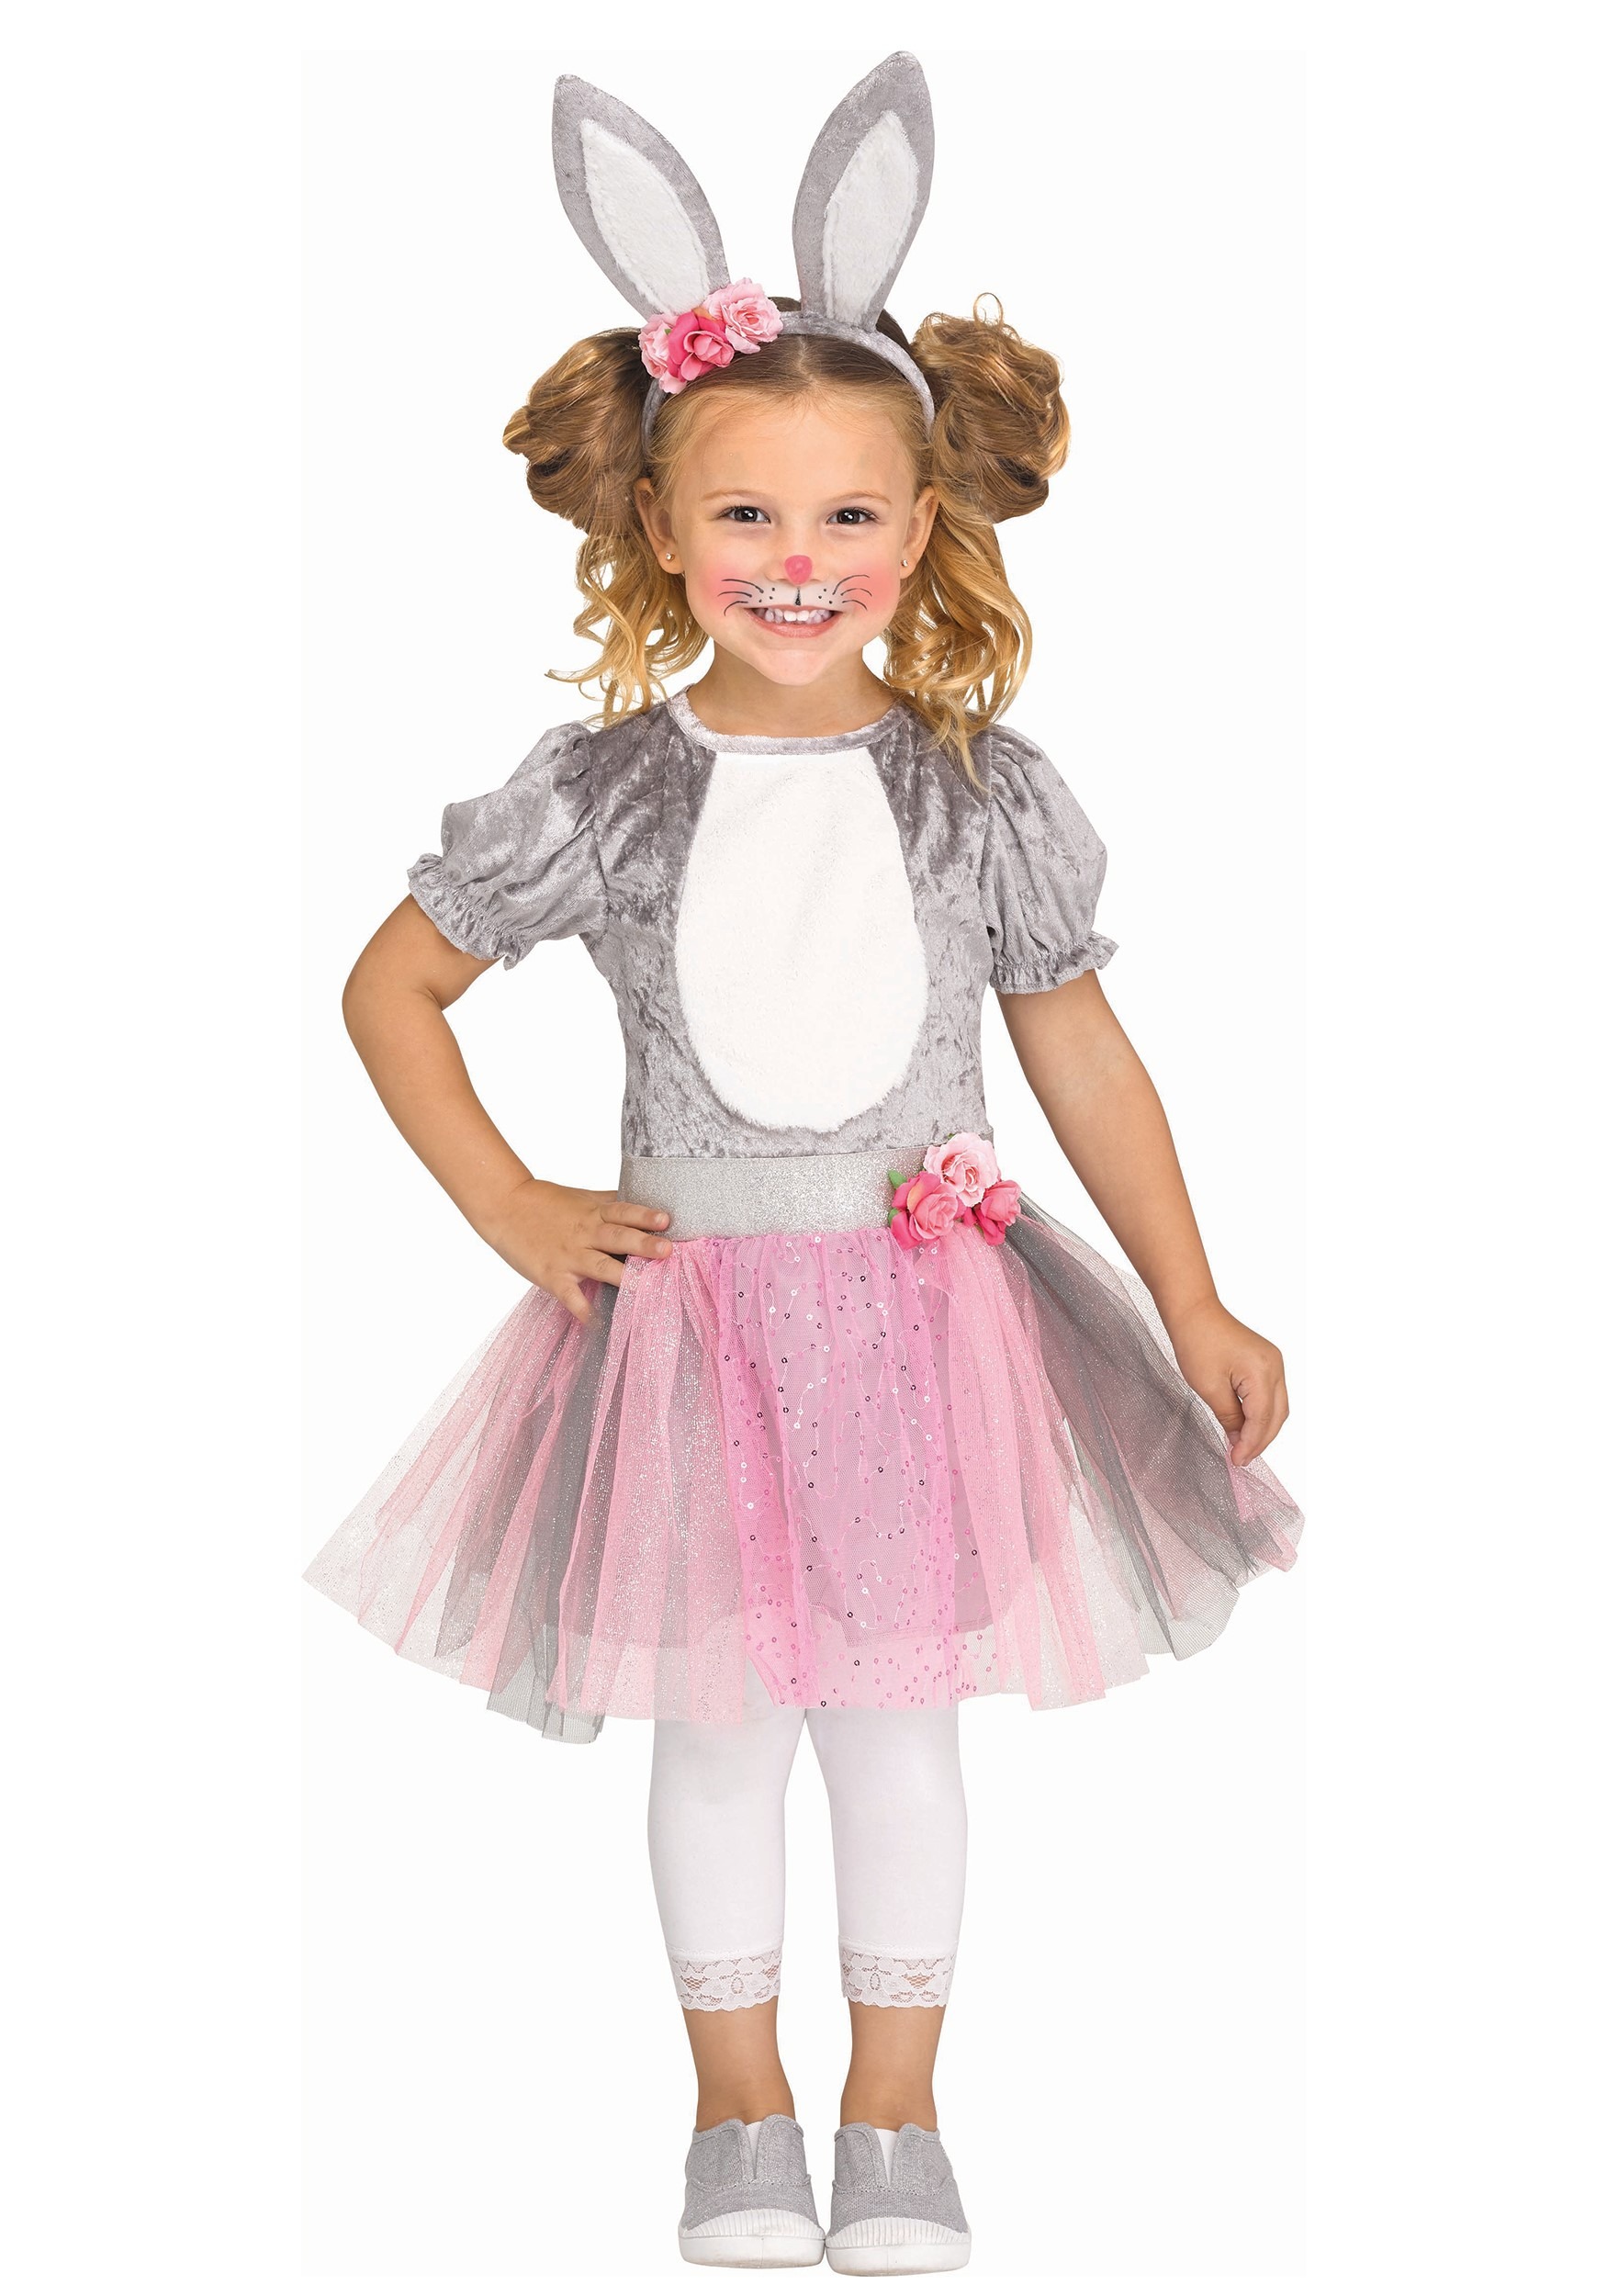 Honey Bunny Costume for Toddlers